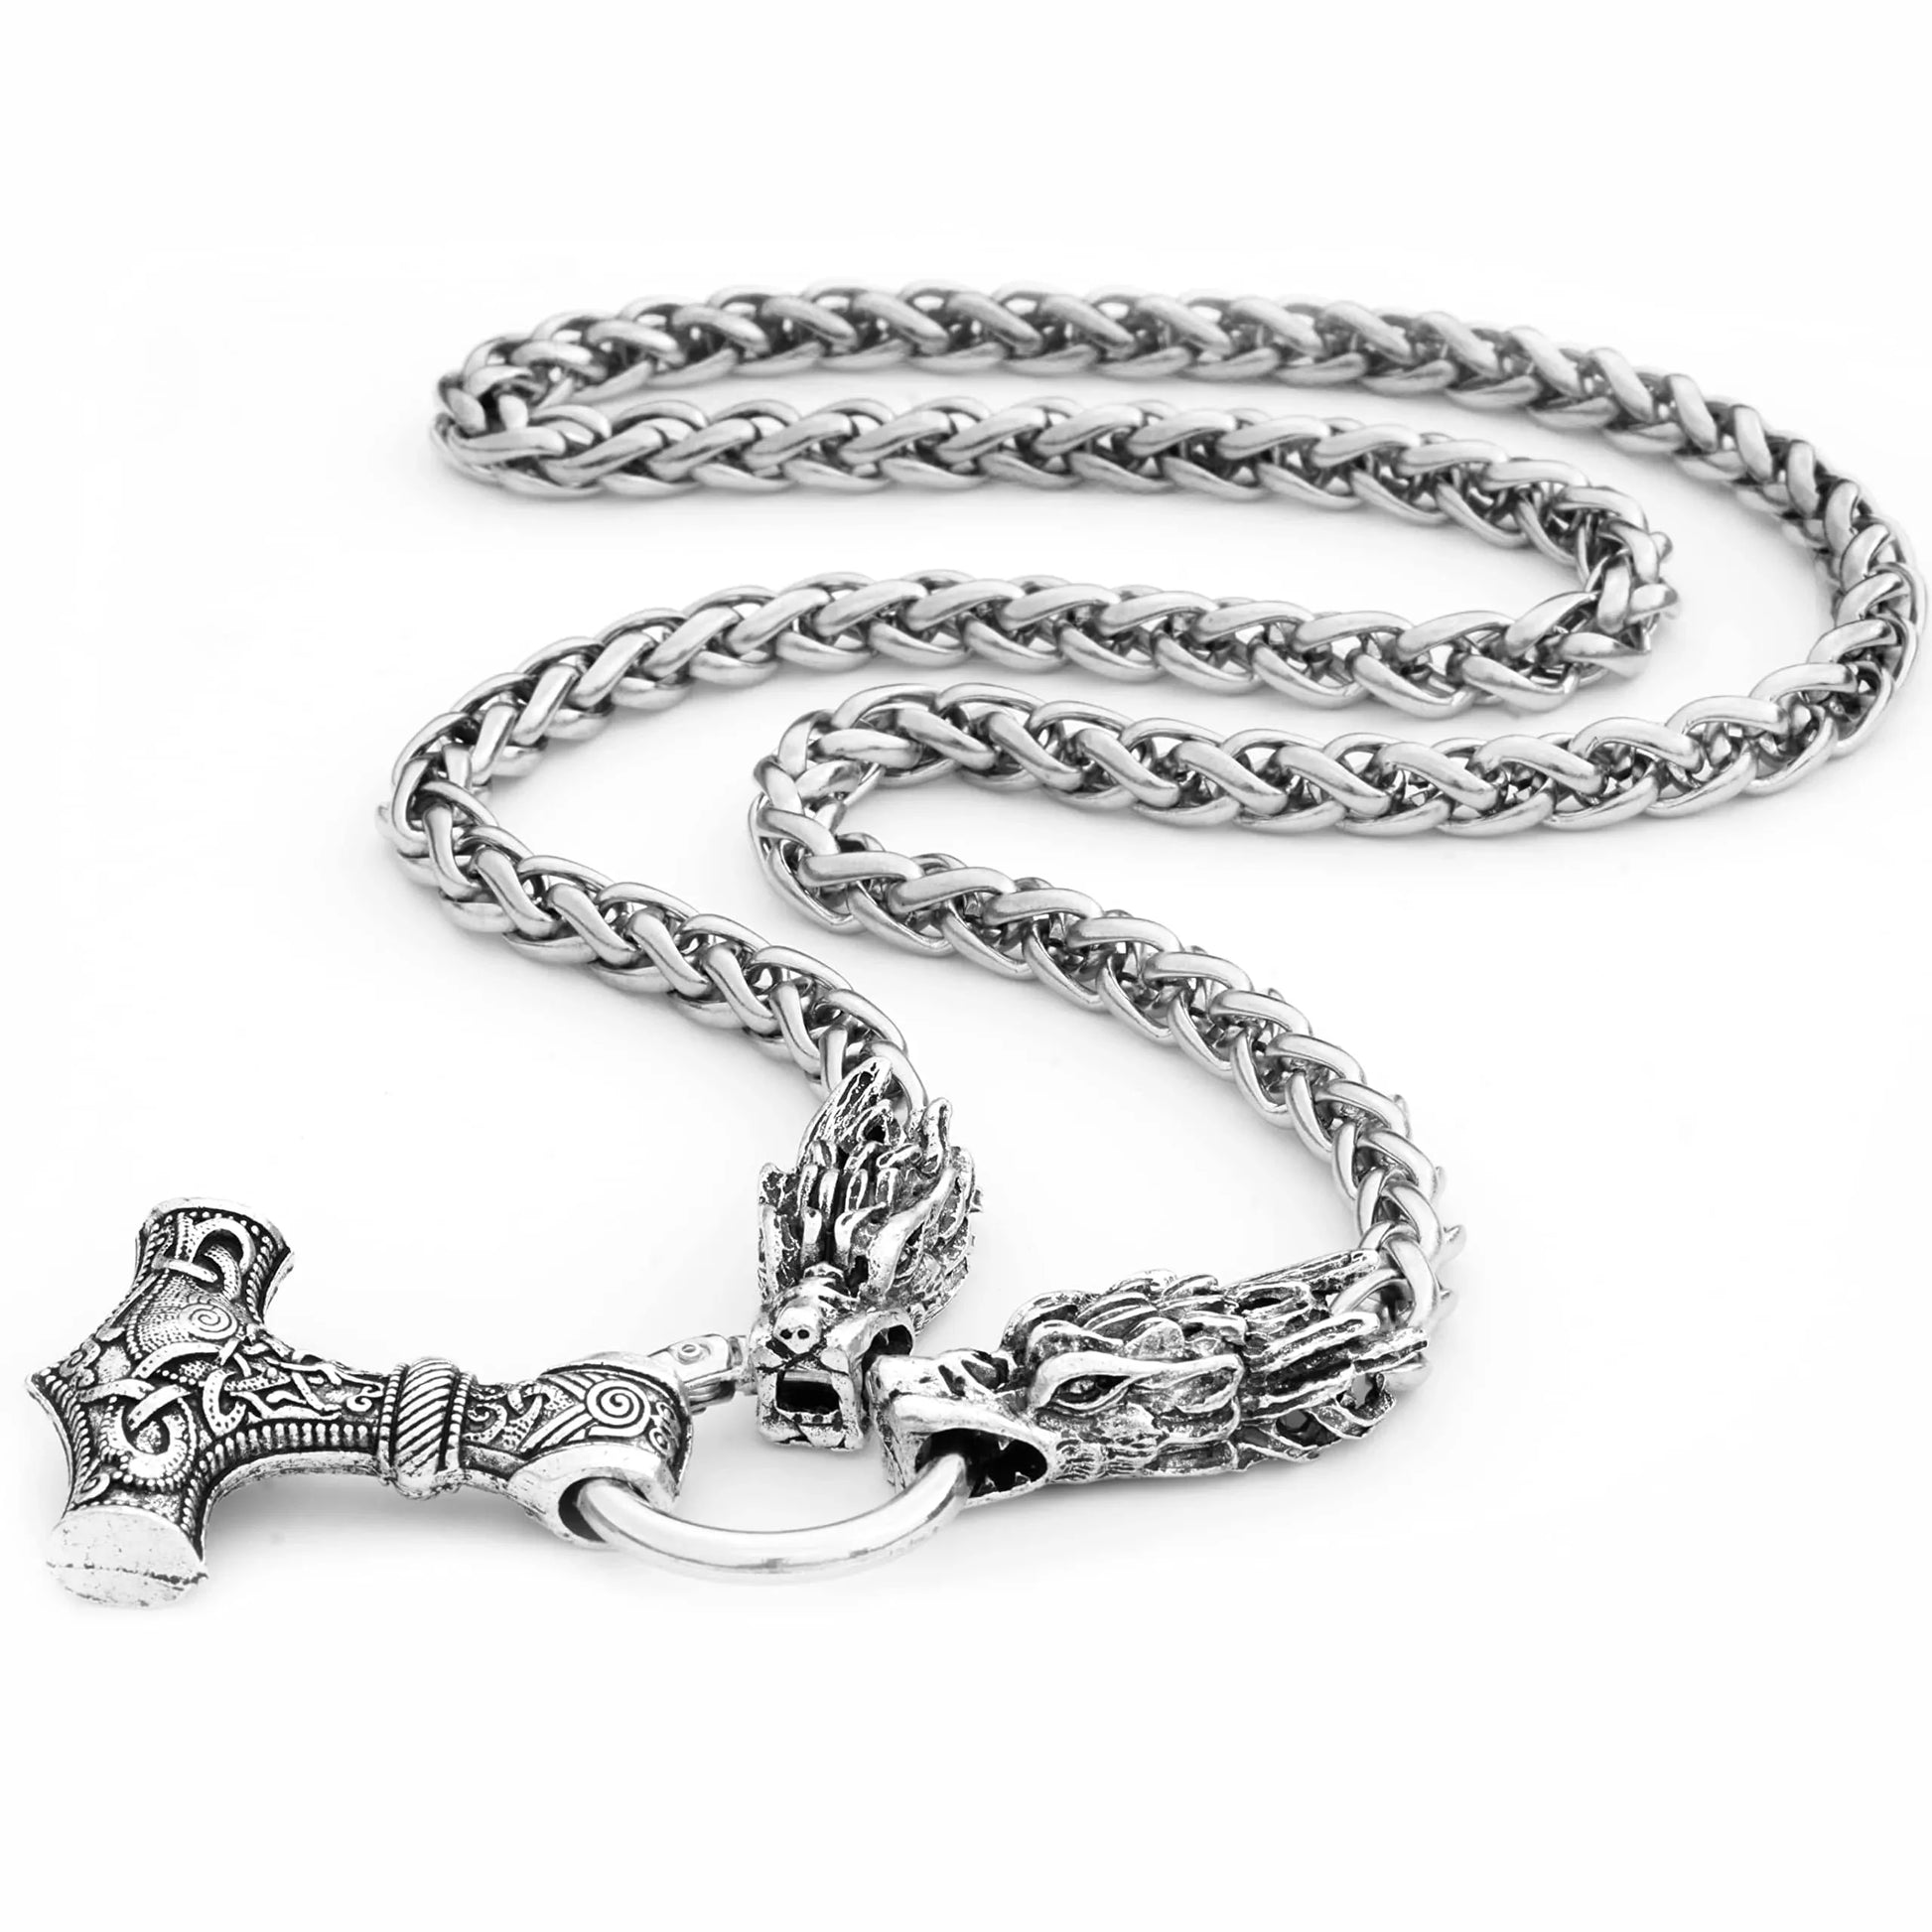 THE MEN THING Norse Viking Thor's Hammer Talisman Necklace, Stainless Steel Nordic Mythology Mjolnir Pendant for Men and Boys